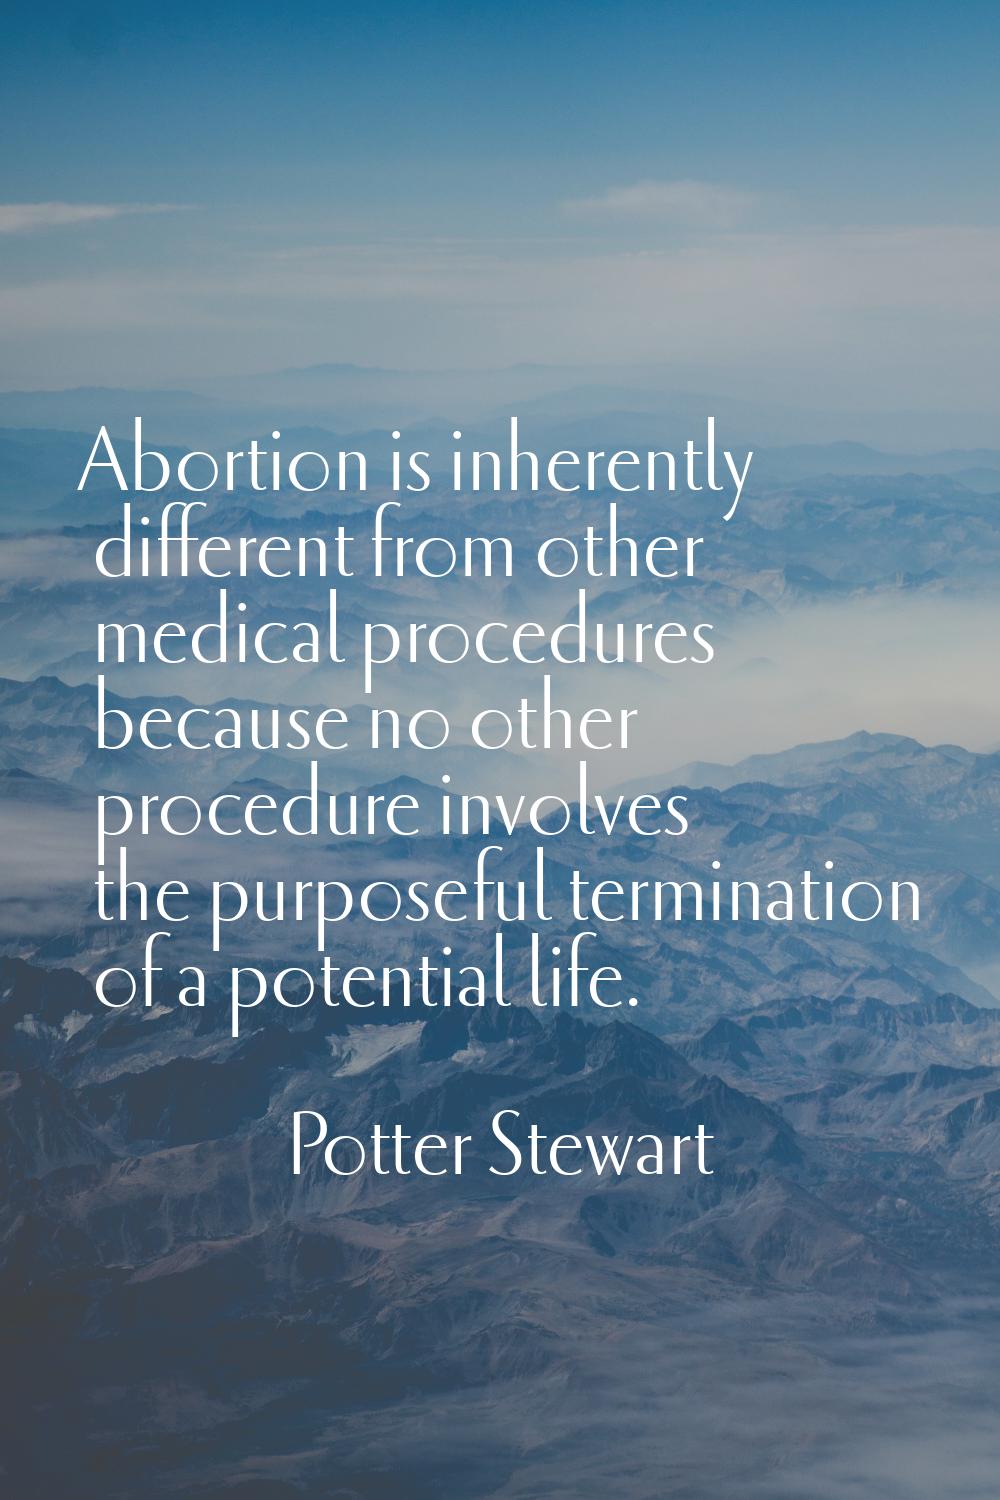 Abortion is inherently different from other medical procedures because no other procedure involves 